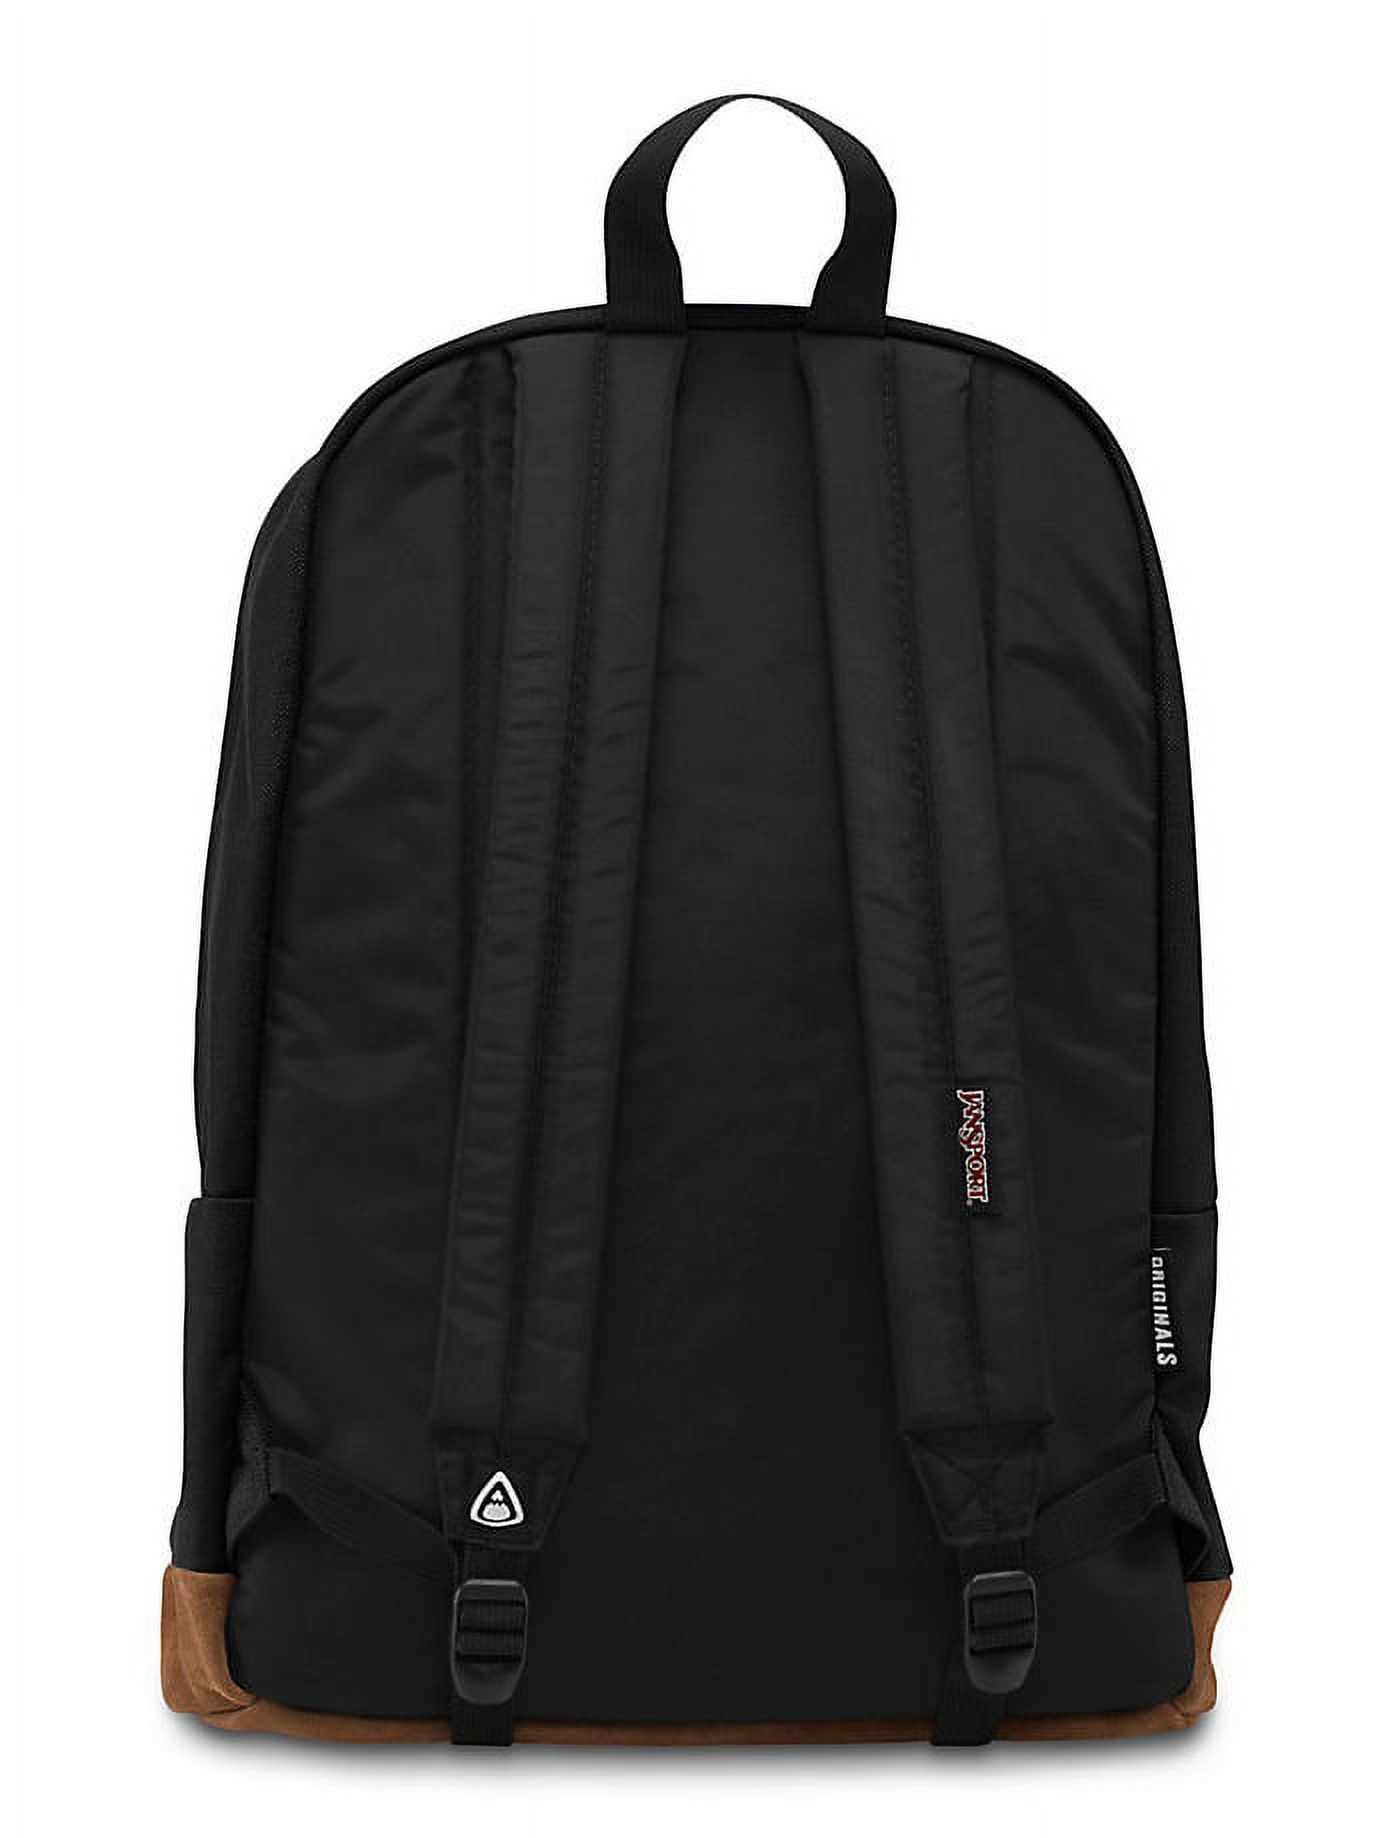 RIGHT PACK Labtop School Backpack - Black - image 2 of 3